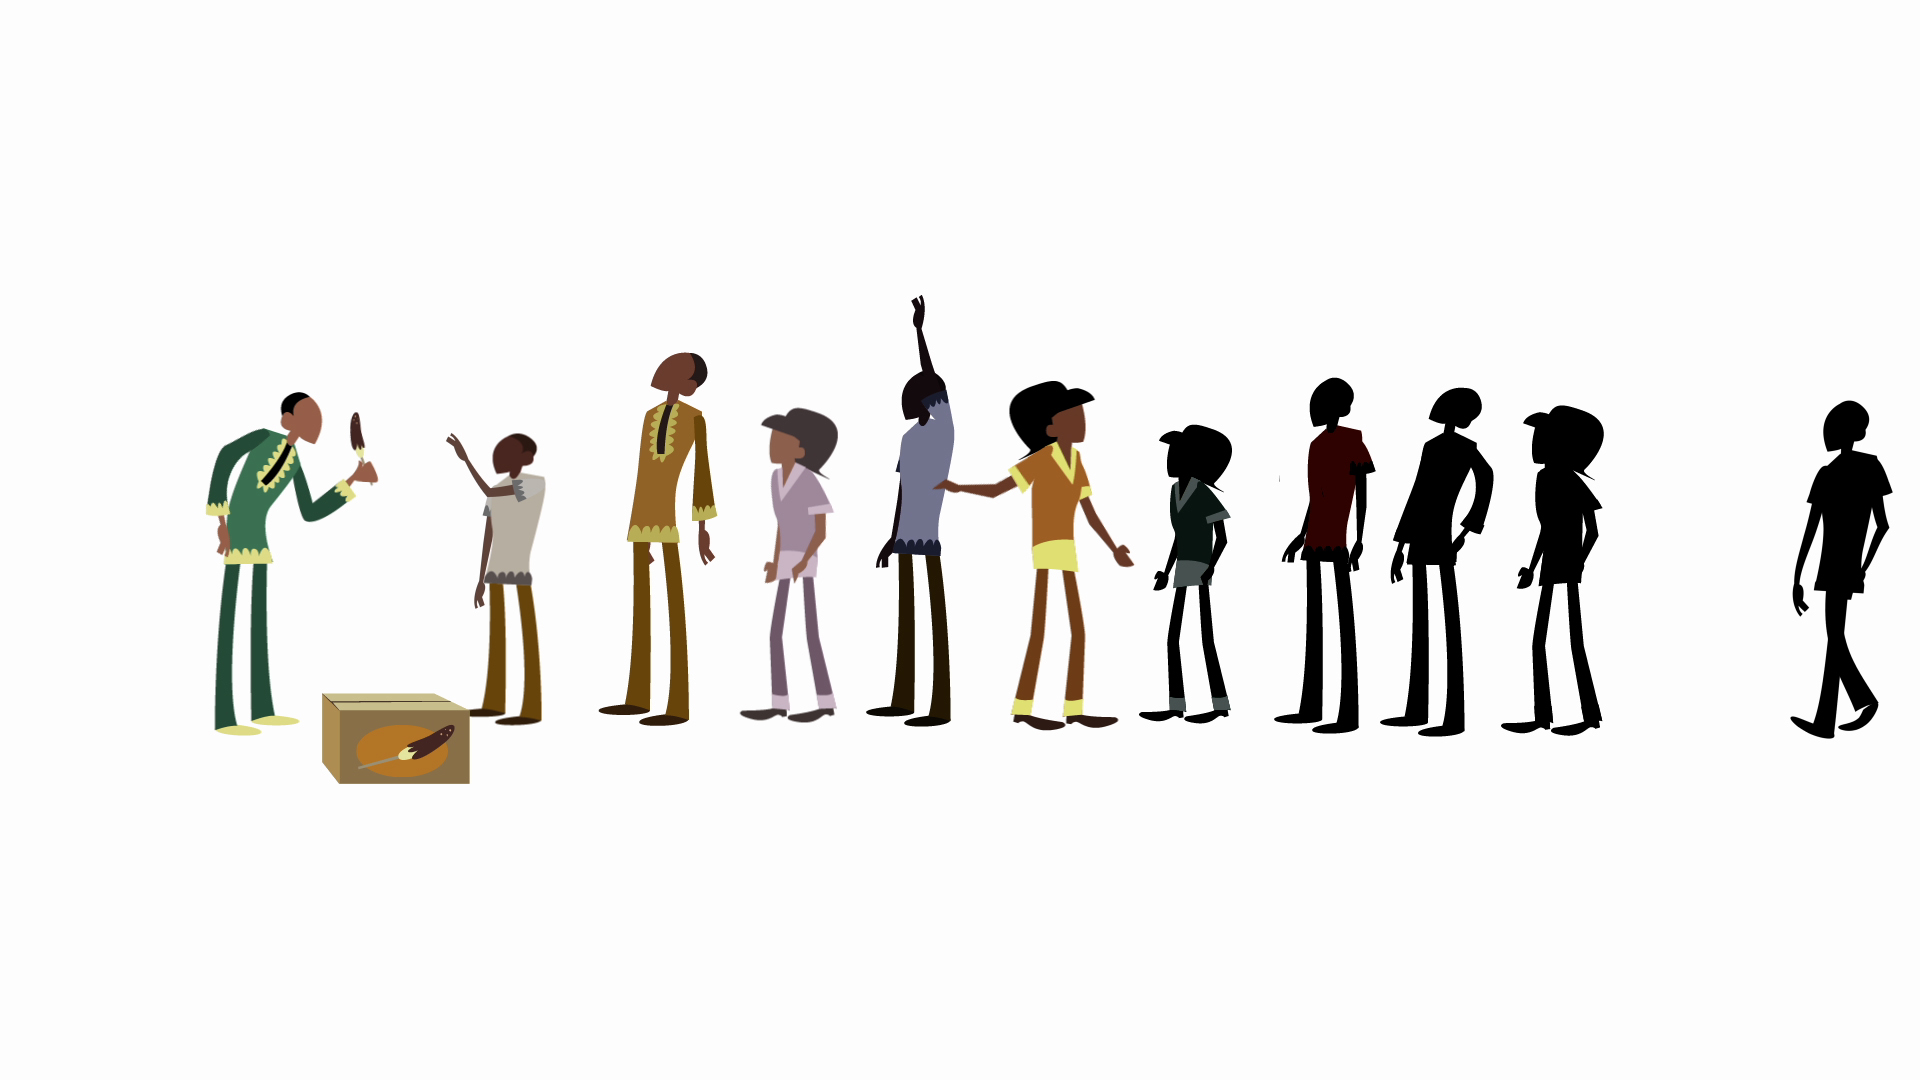 An animated image of people standing in line as they greet a man at the front.